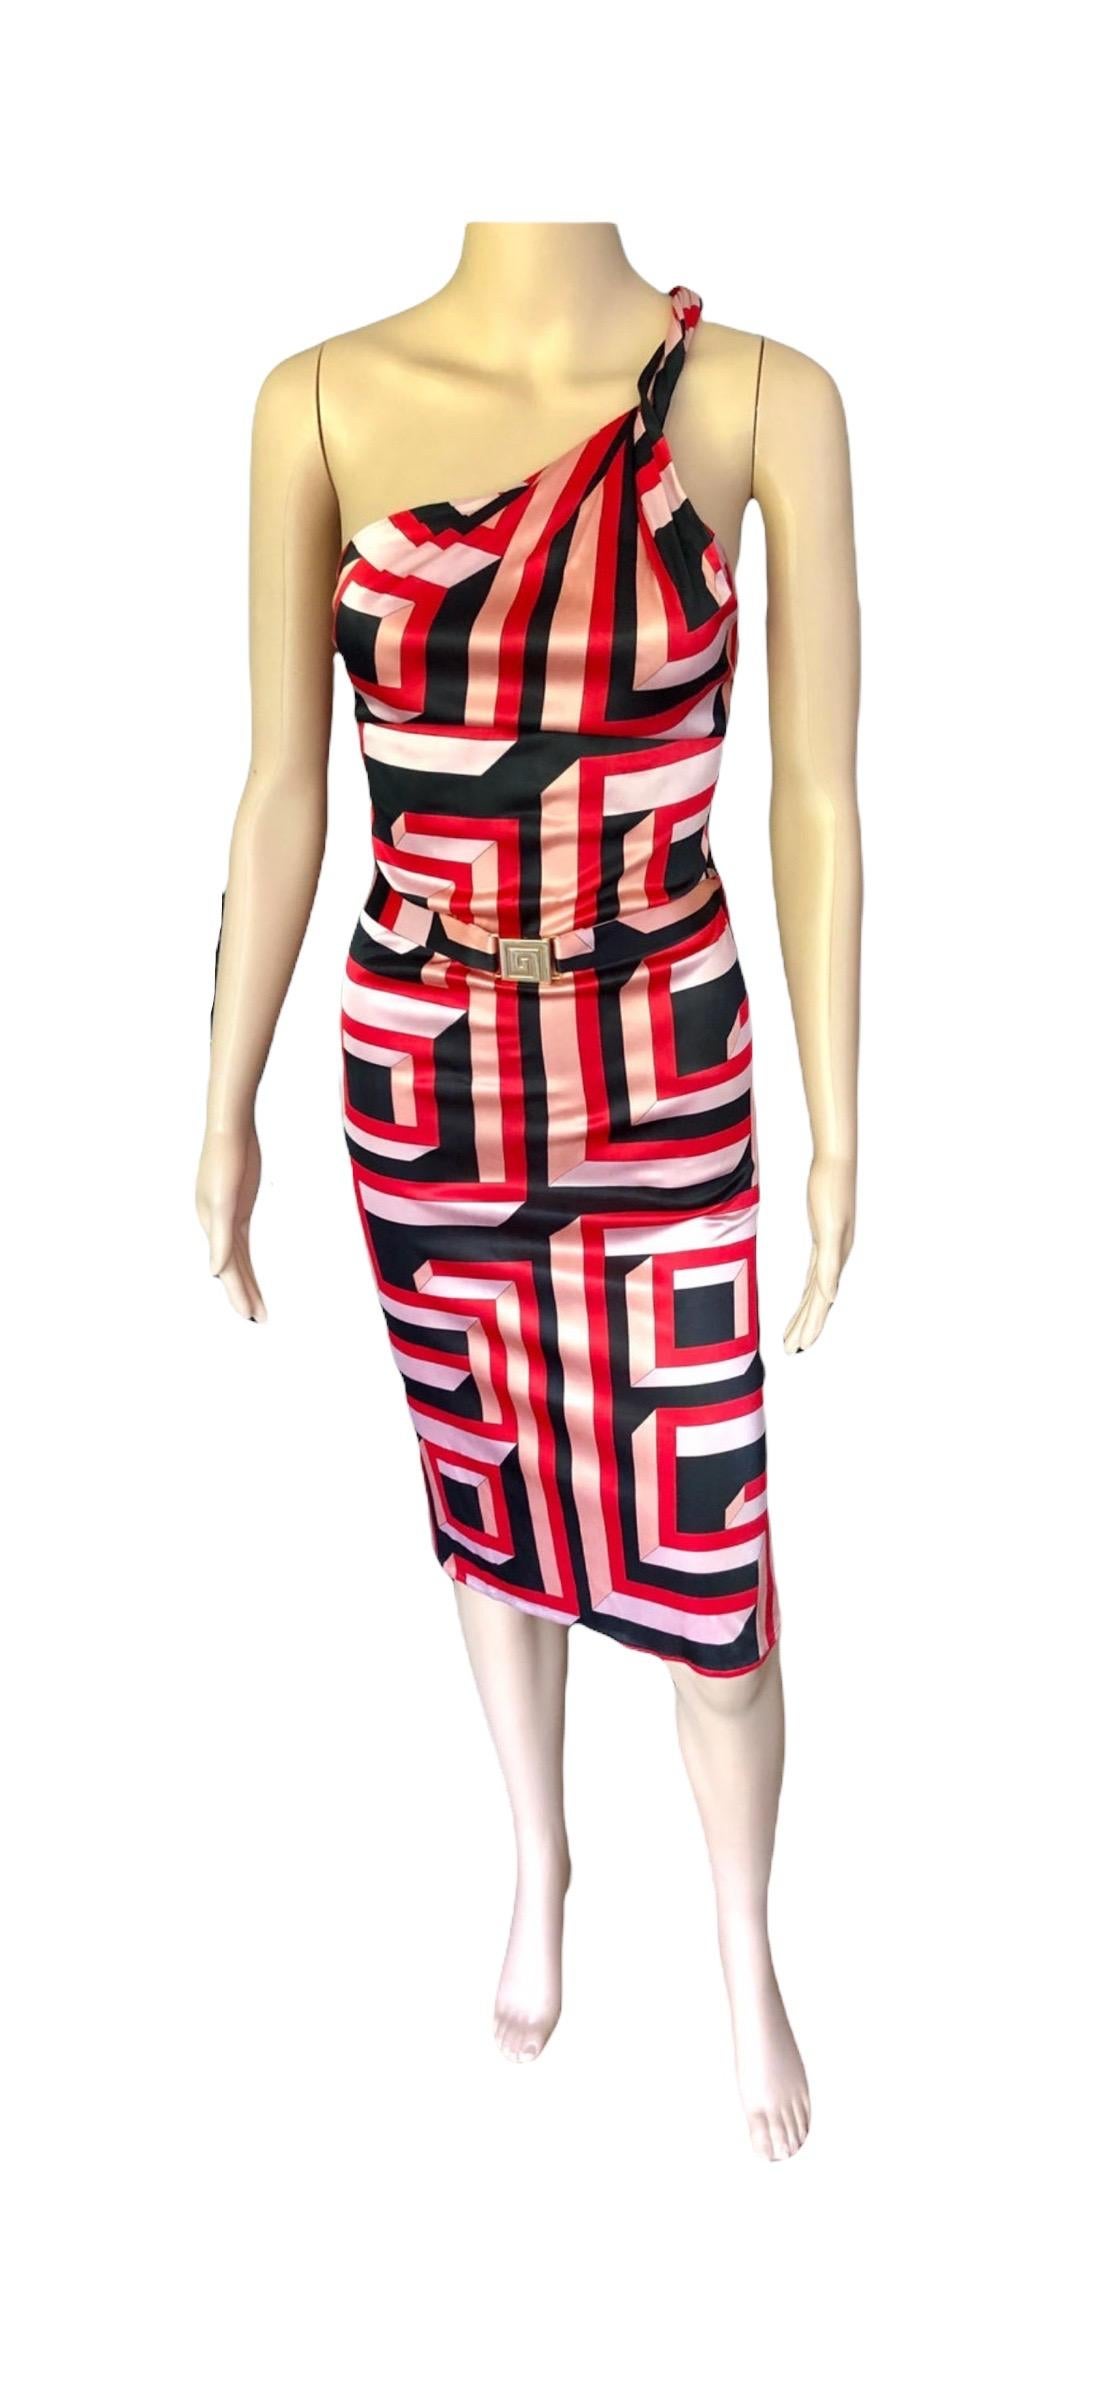 Gianni Versace S/S 2001 Vintage Geometric Print Belted Open Back Dress For Sale 9